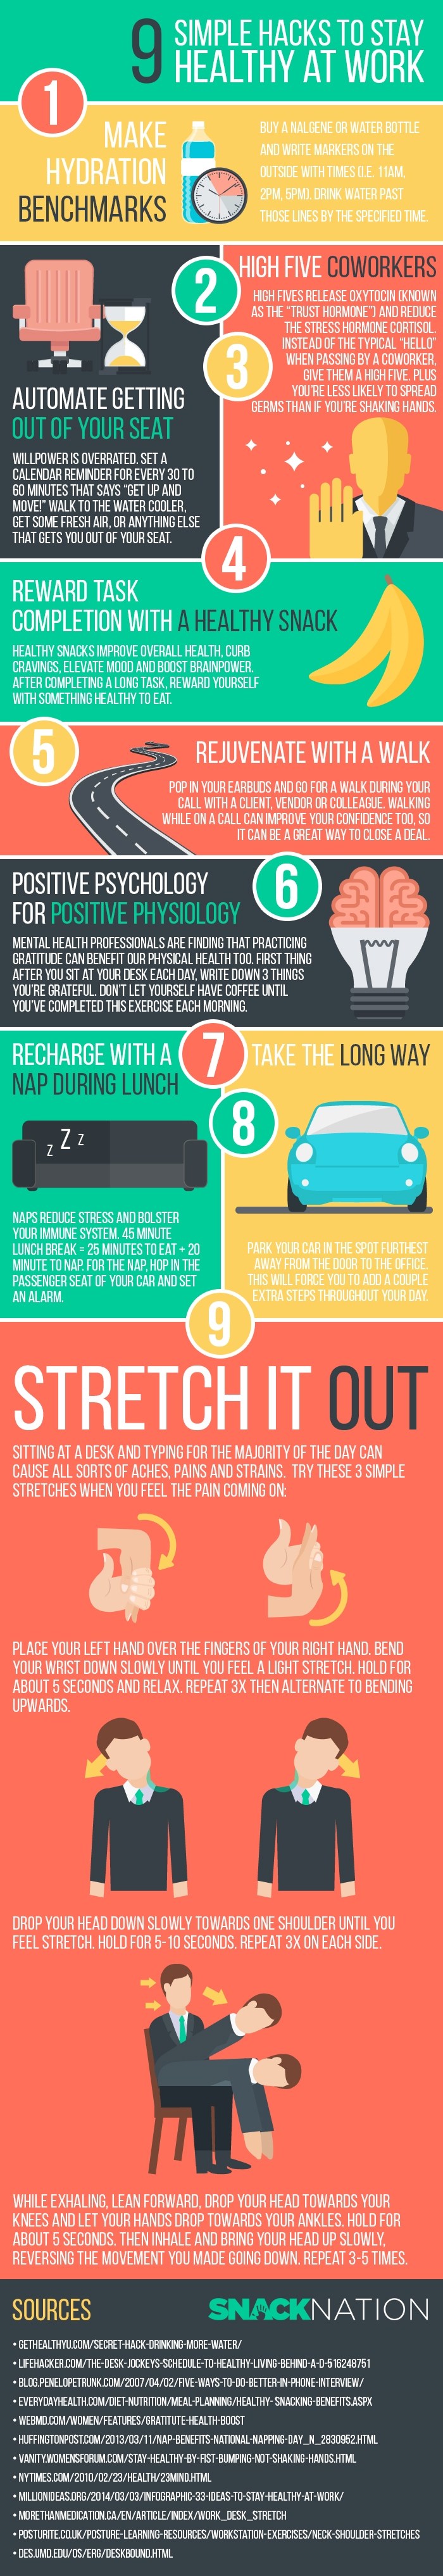 9-simple-hacks-to-stay-healthy-at-work-infographic-min4